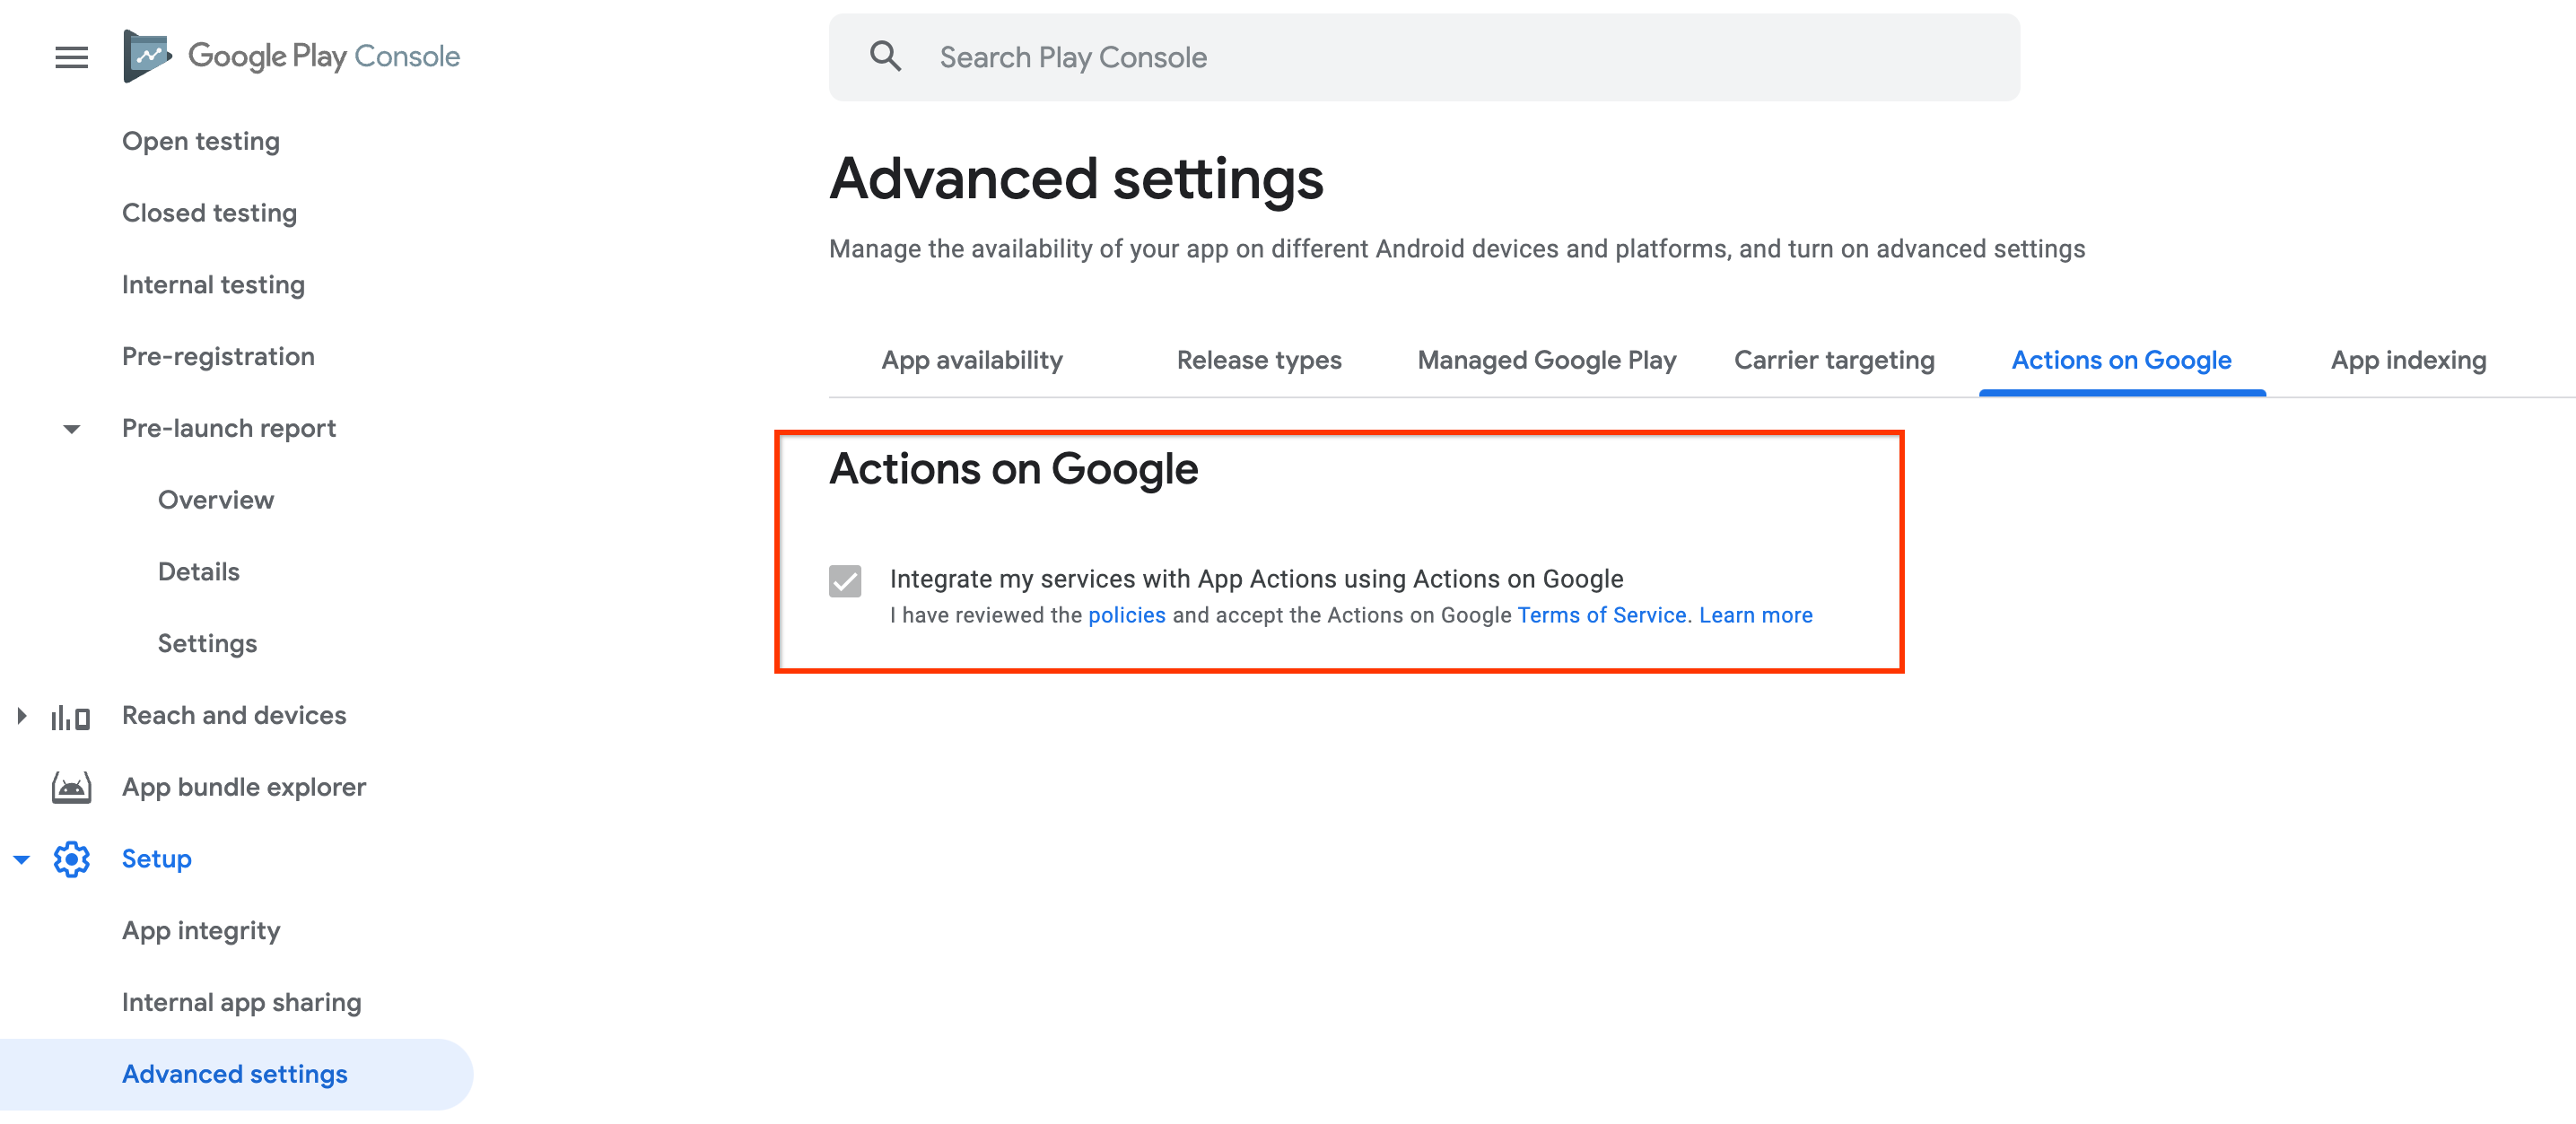 App Actions 利用規約（Google Play Console 内）